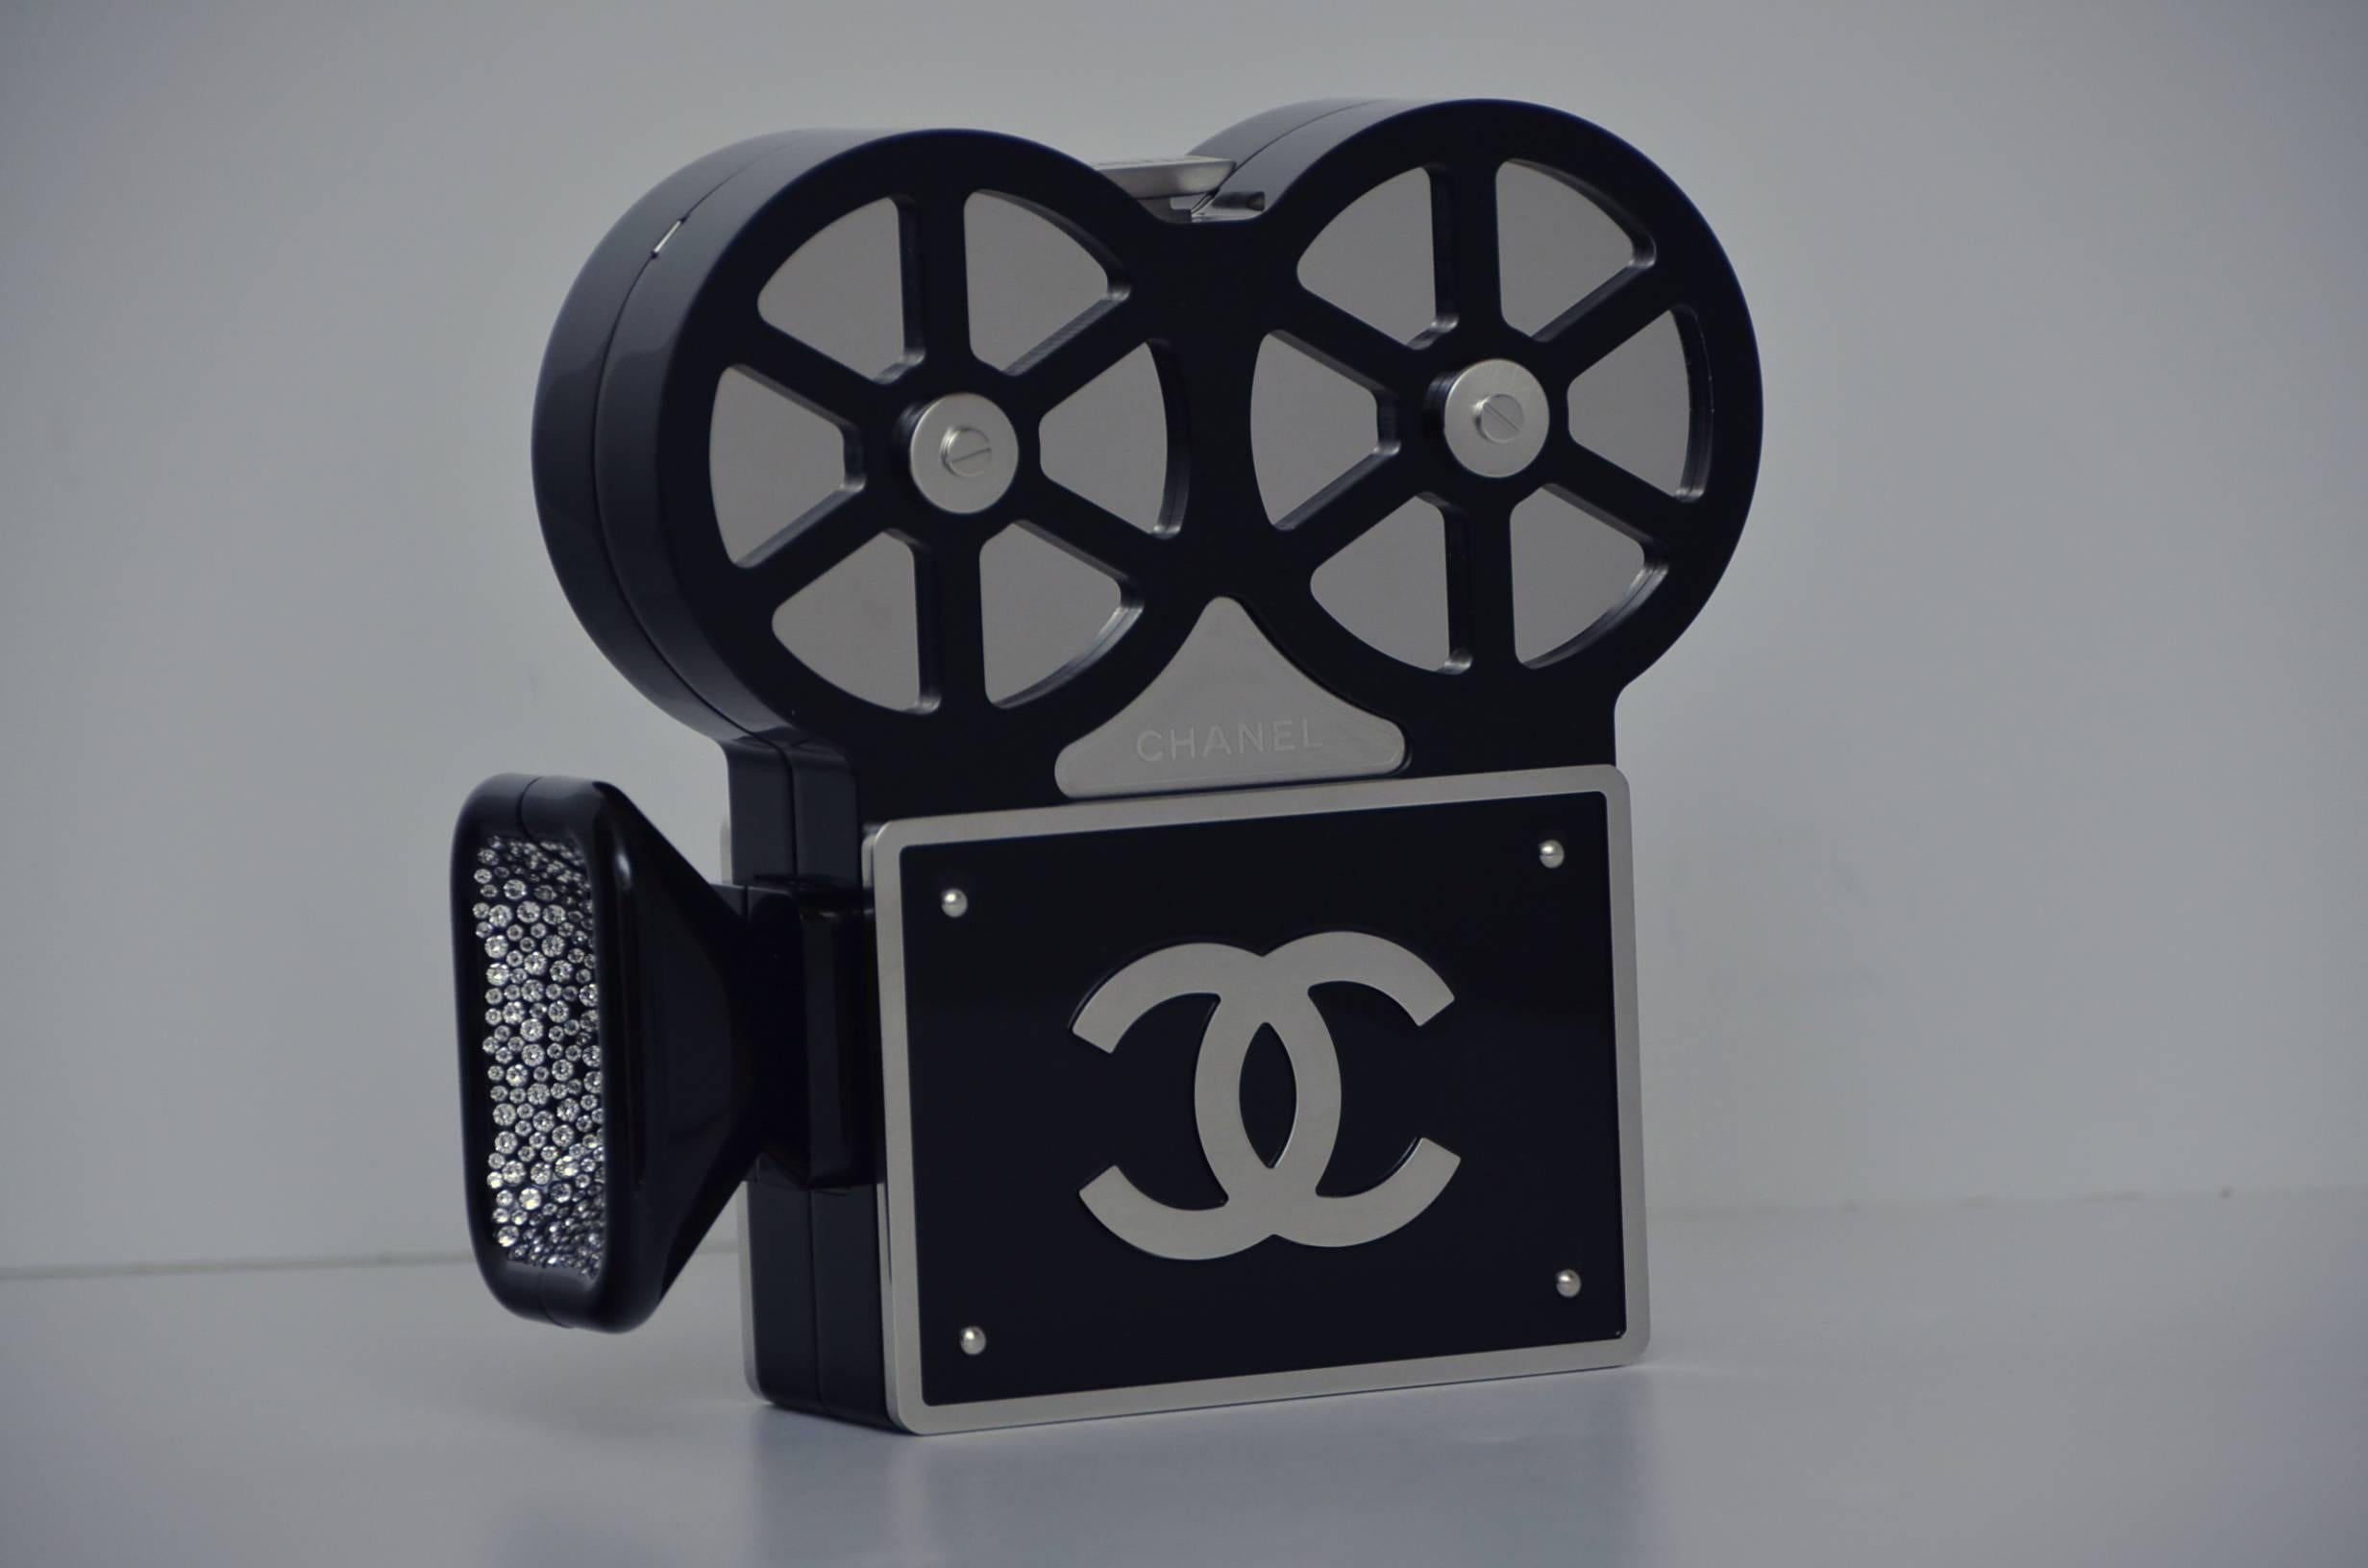 This year for their legendary Métiers d’Art collection, Chanel presented Paris in Rome – an epic show set in Cinecittà, Italy’s famous film studios. One of the most coveted pieces from the runway collection was this  camera bag. 
Made of